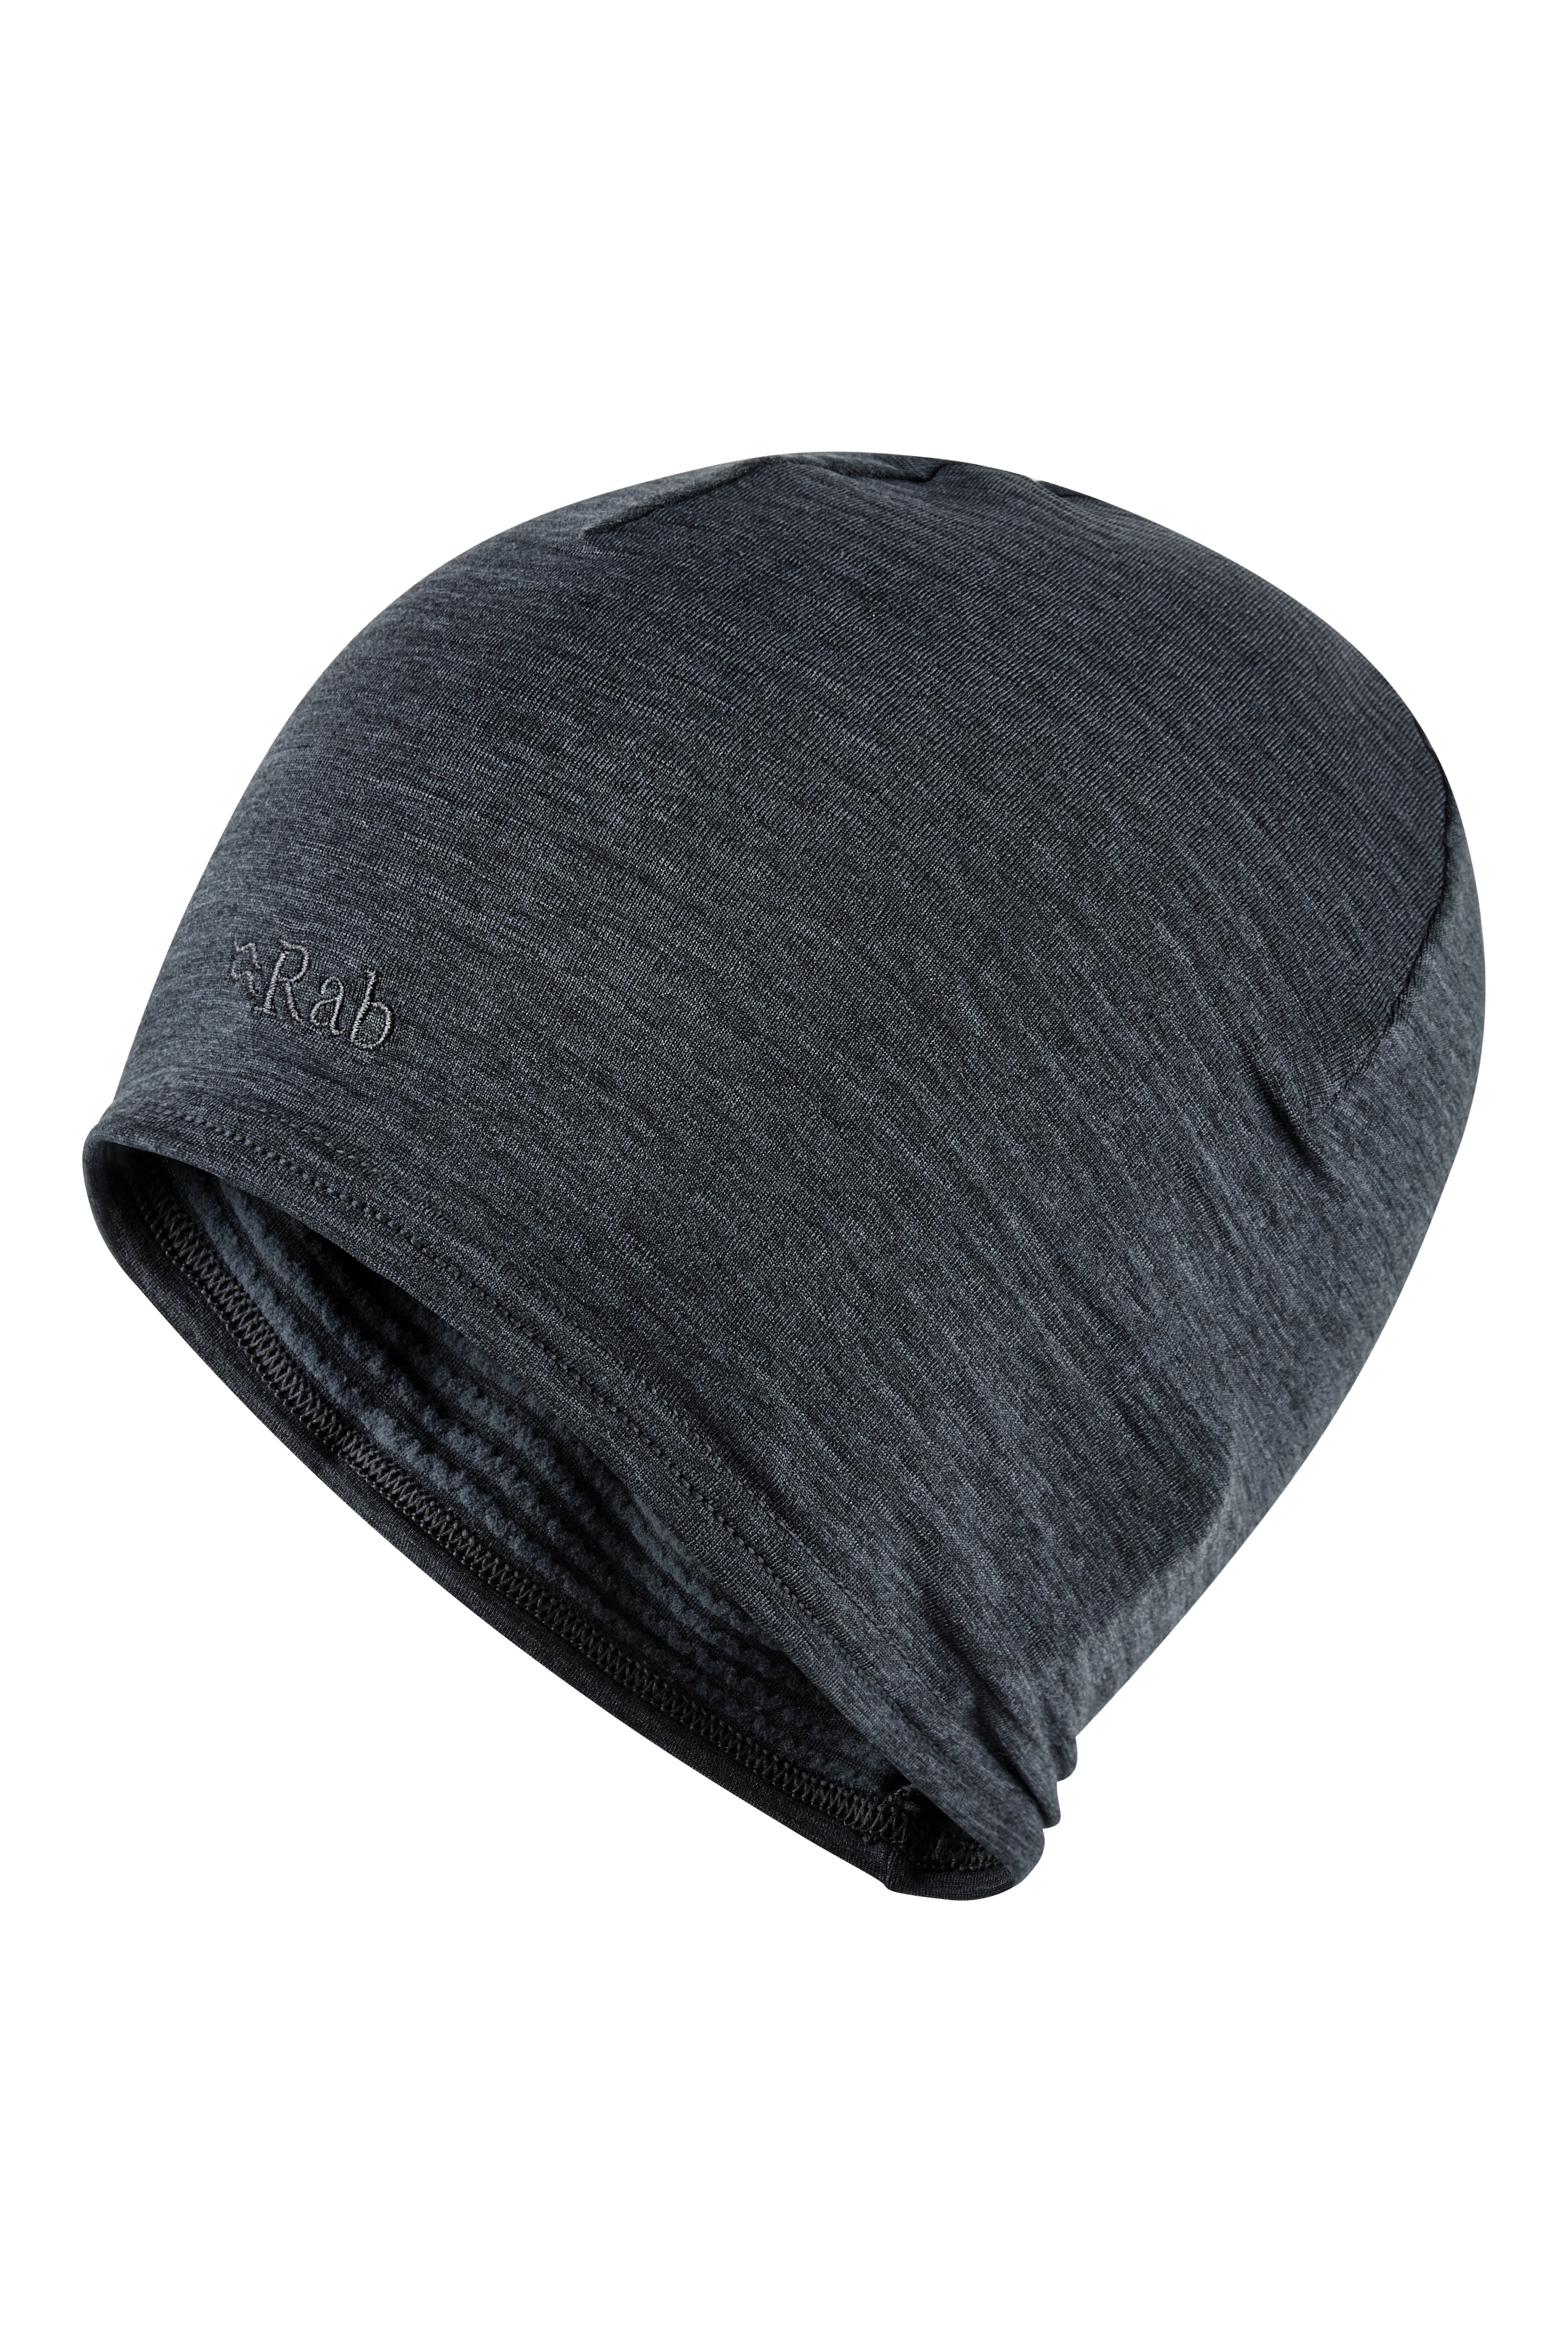 Rab Logo Beanie - Outfitters Store